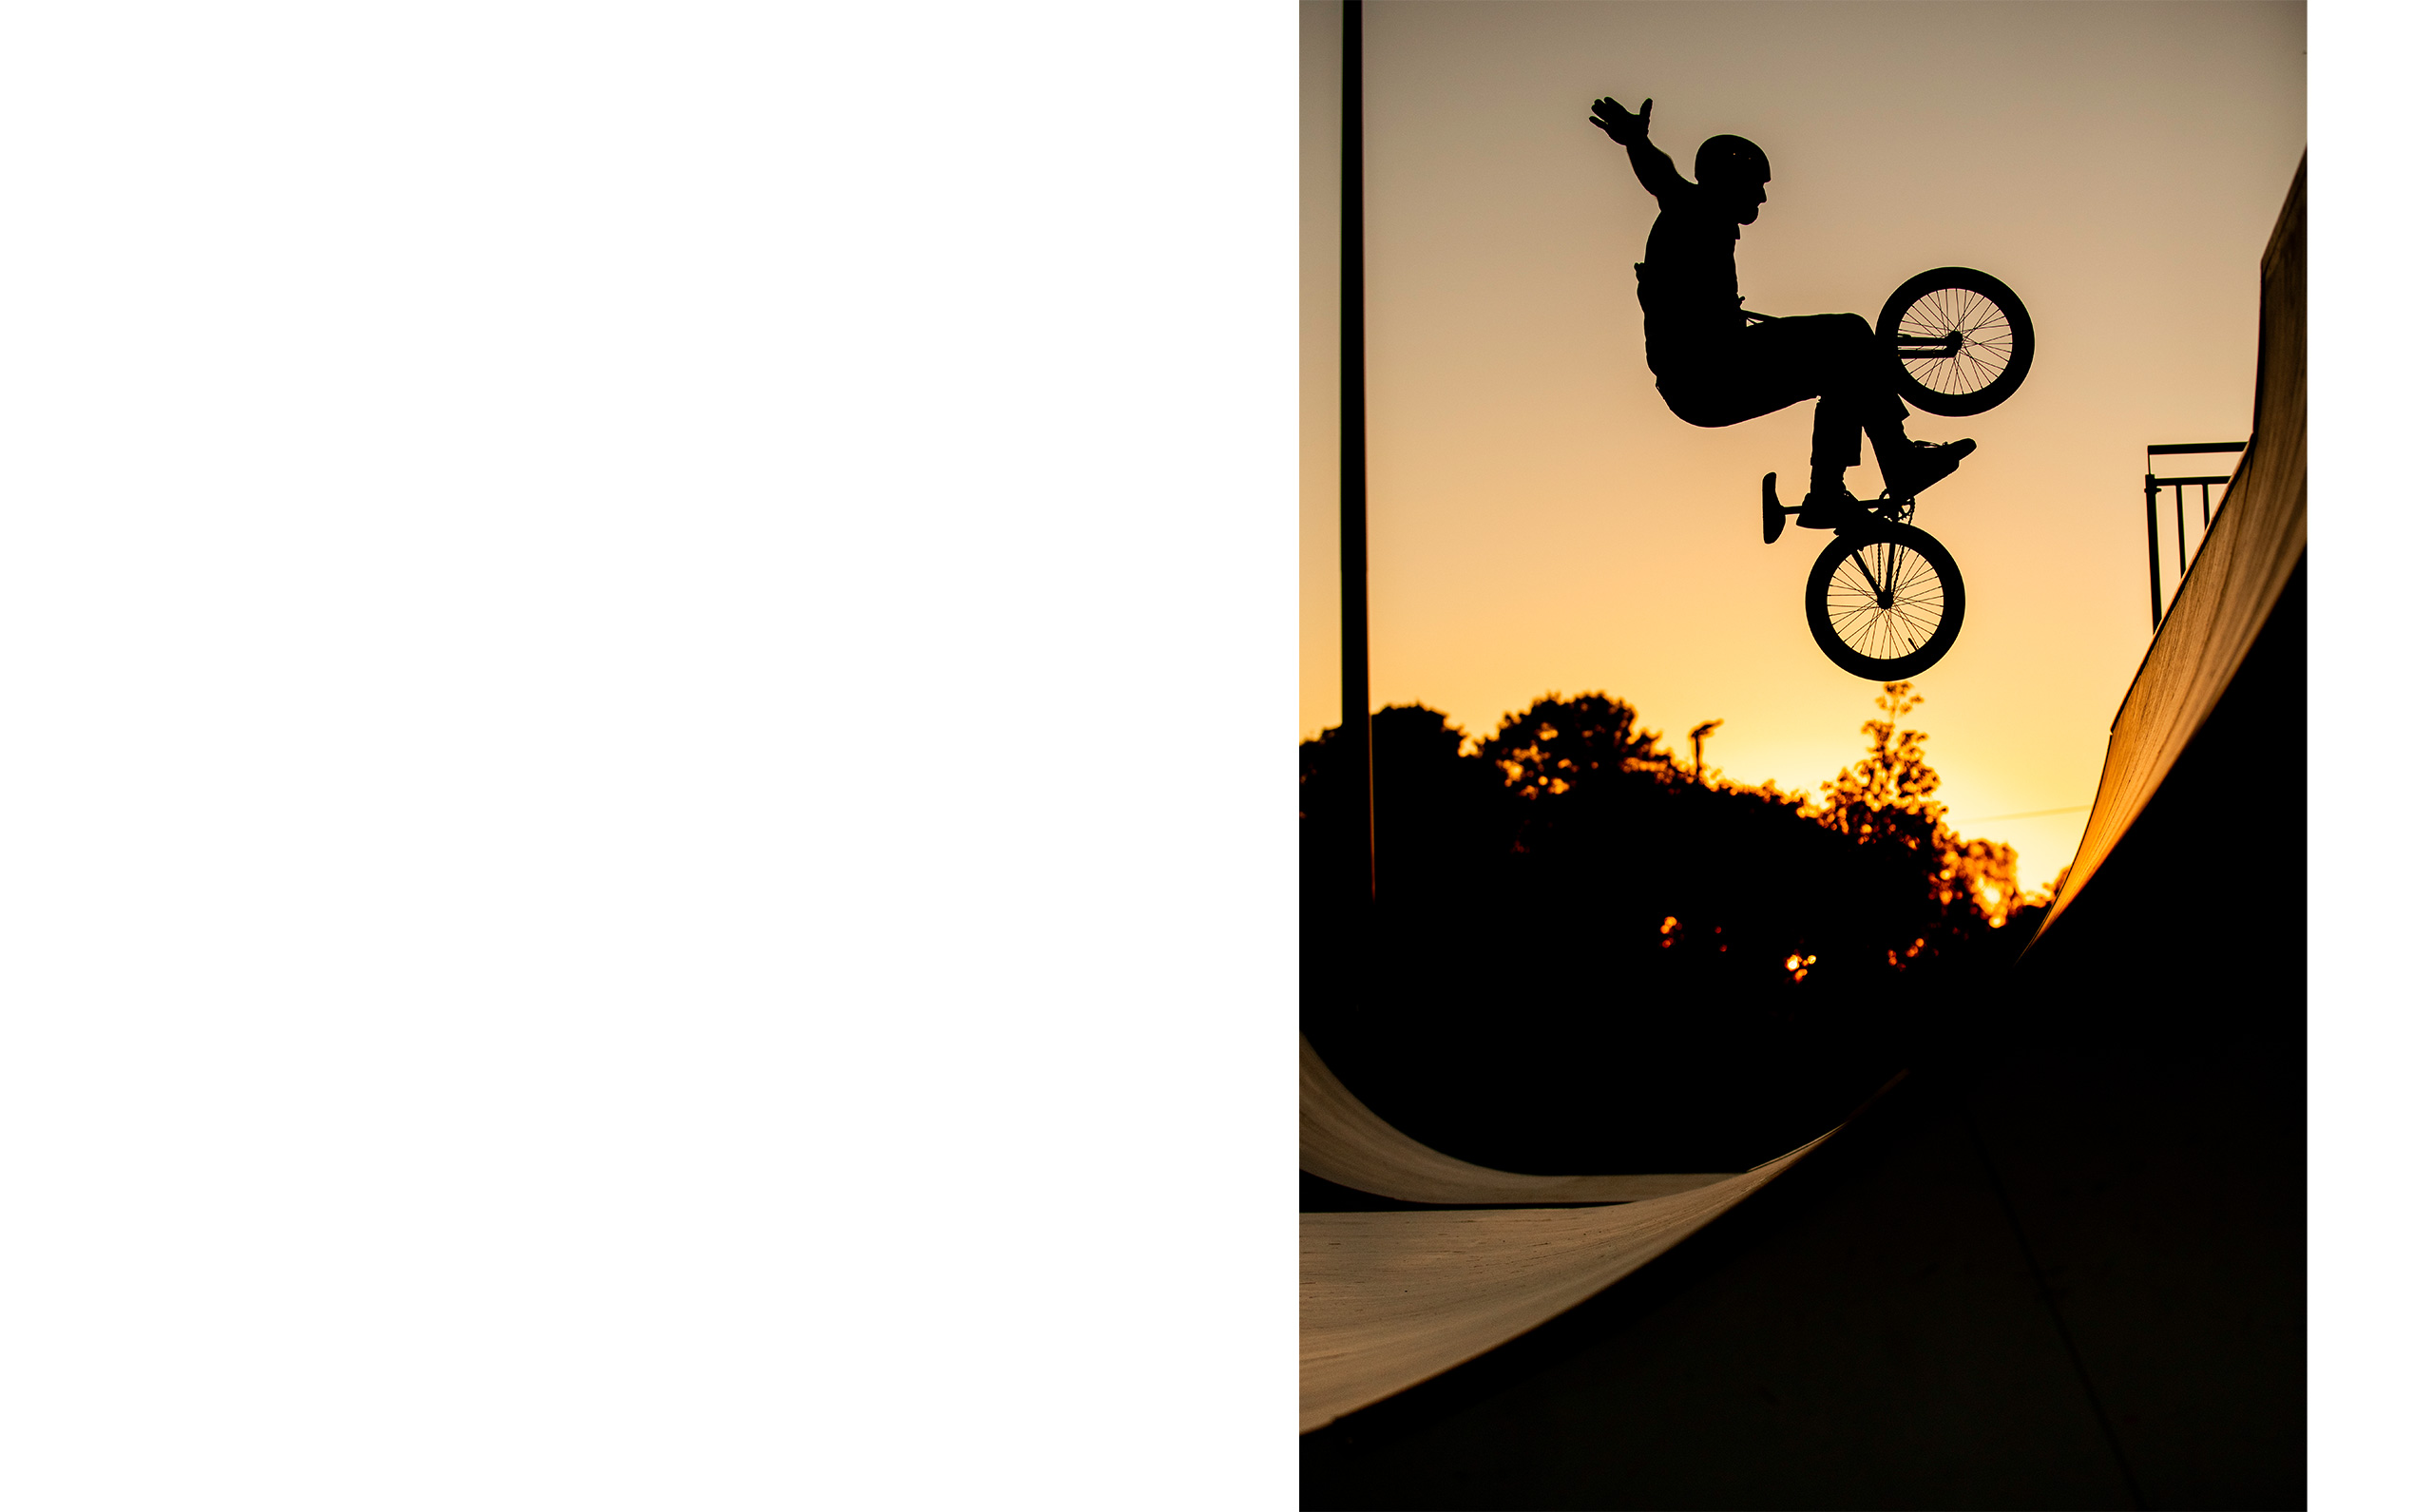 Nathan “Lanky” Phillips pulls a tuck no hander to fakie on sunset at Beenleigh BMX park.